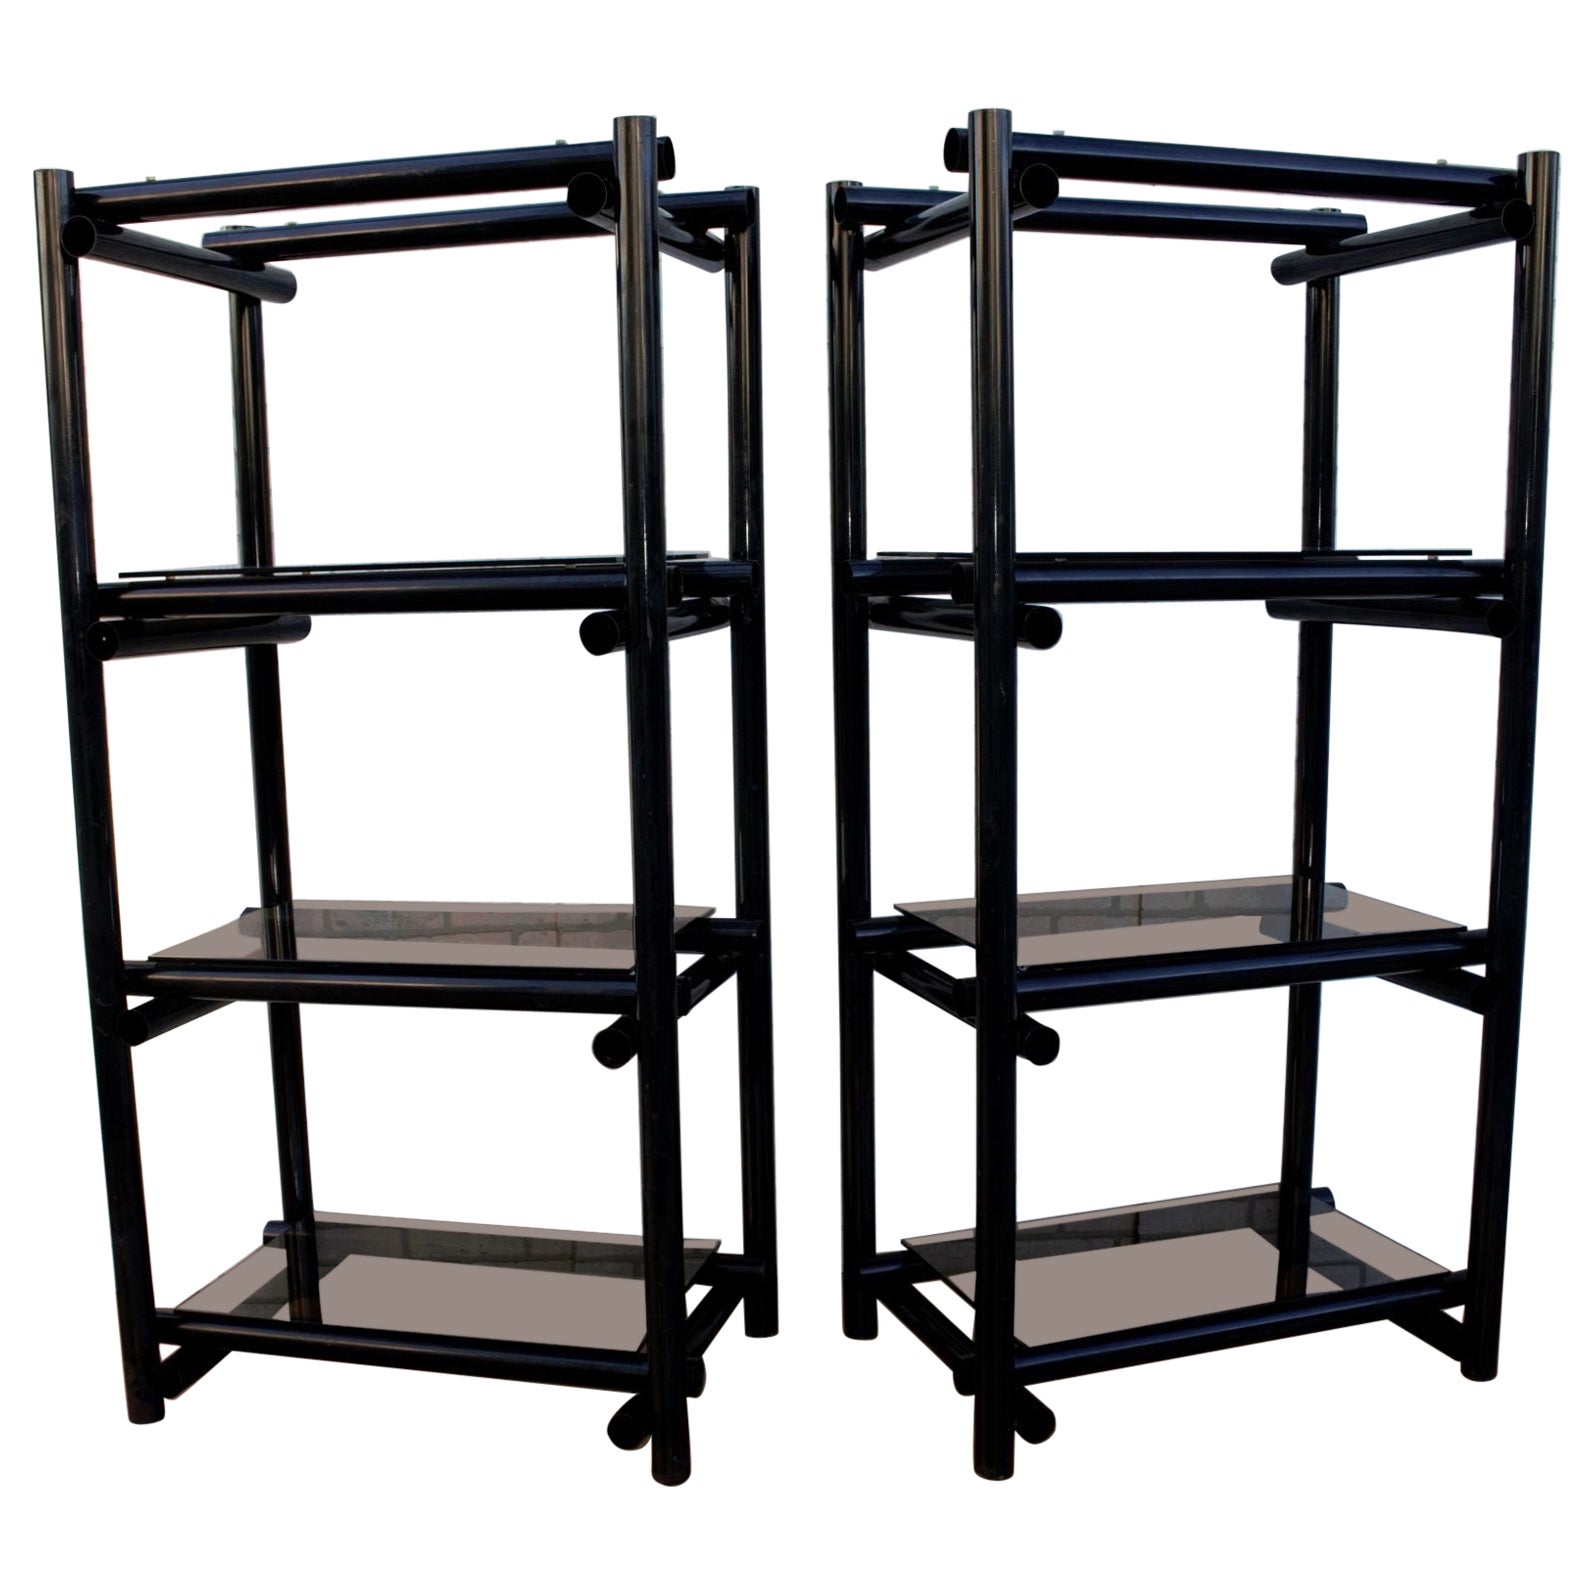 Vintage Modernist Tubular Black Metal Shelving Etagere with Tinted Glass, Pair For Sale